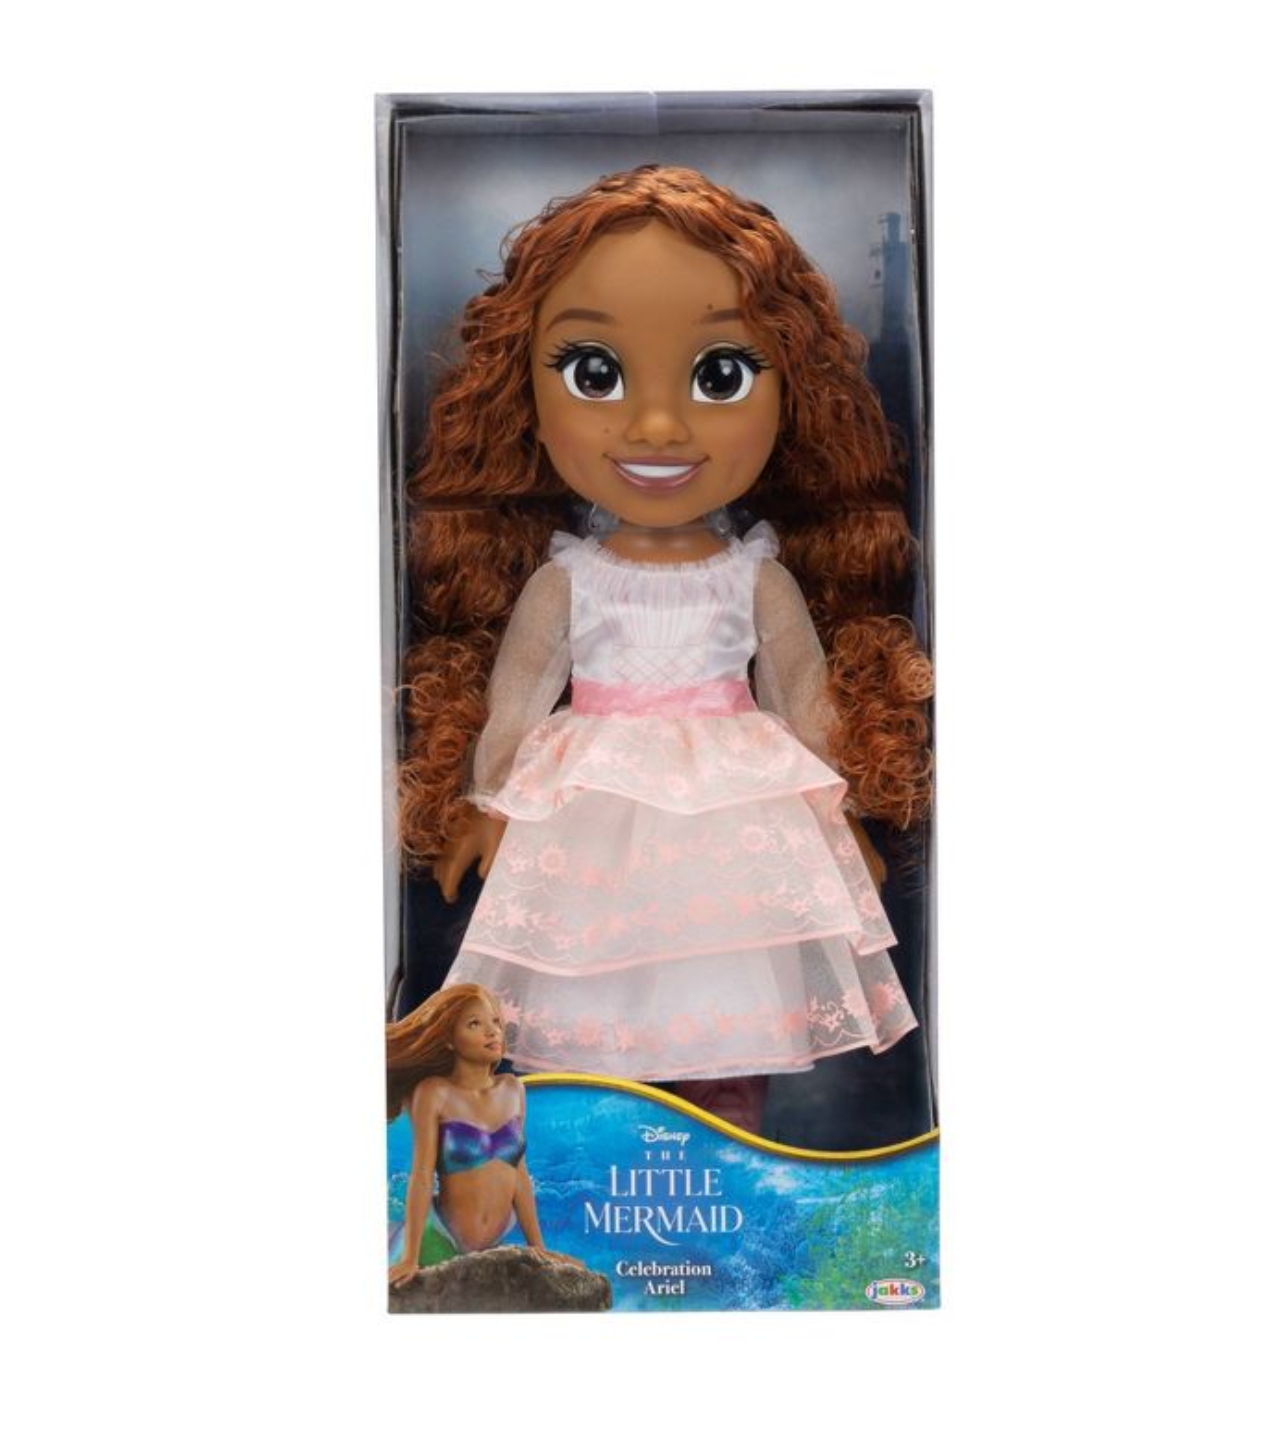 Disney The Little Mermaid Live Action Celebration Ariel Large Doll New with Box